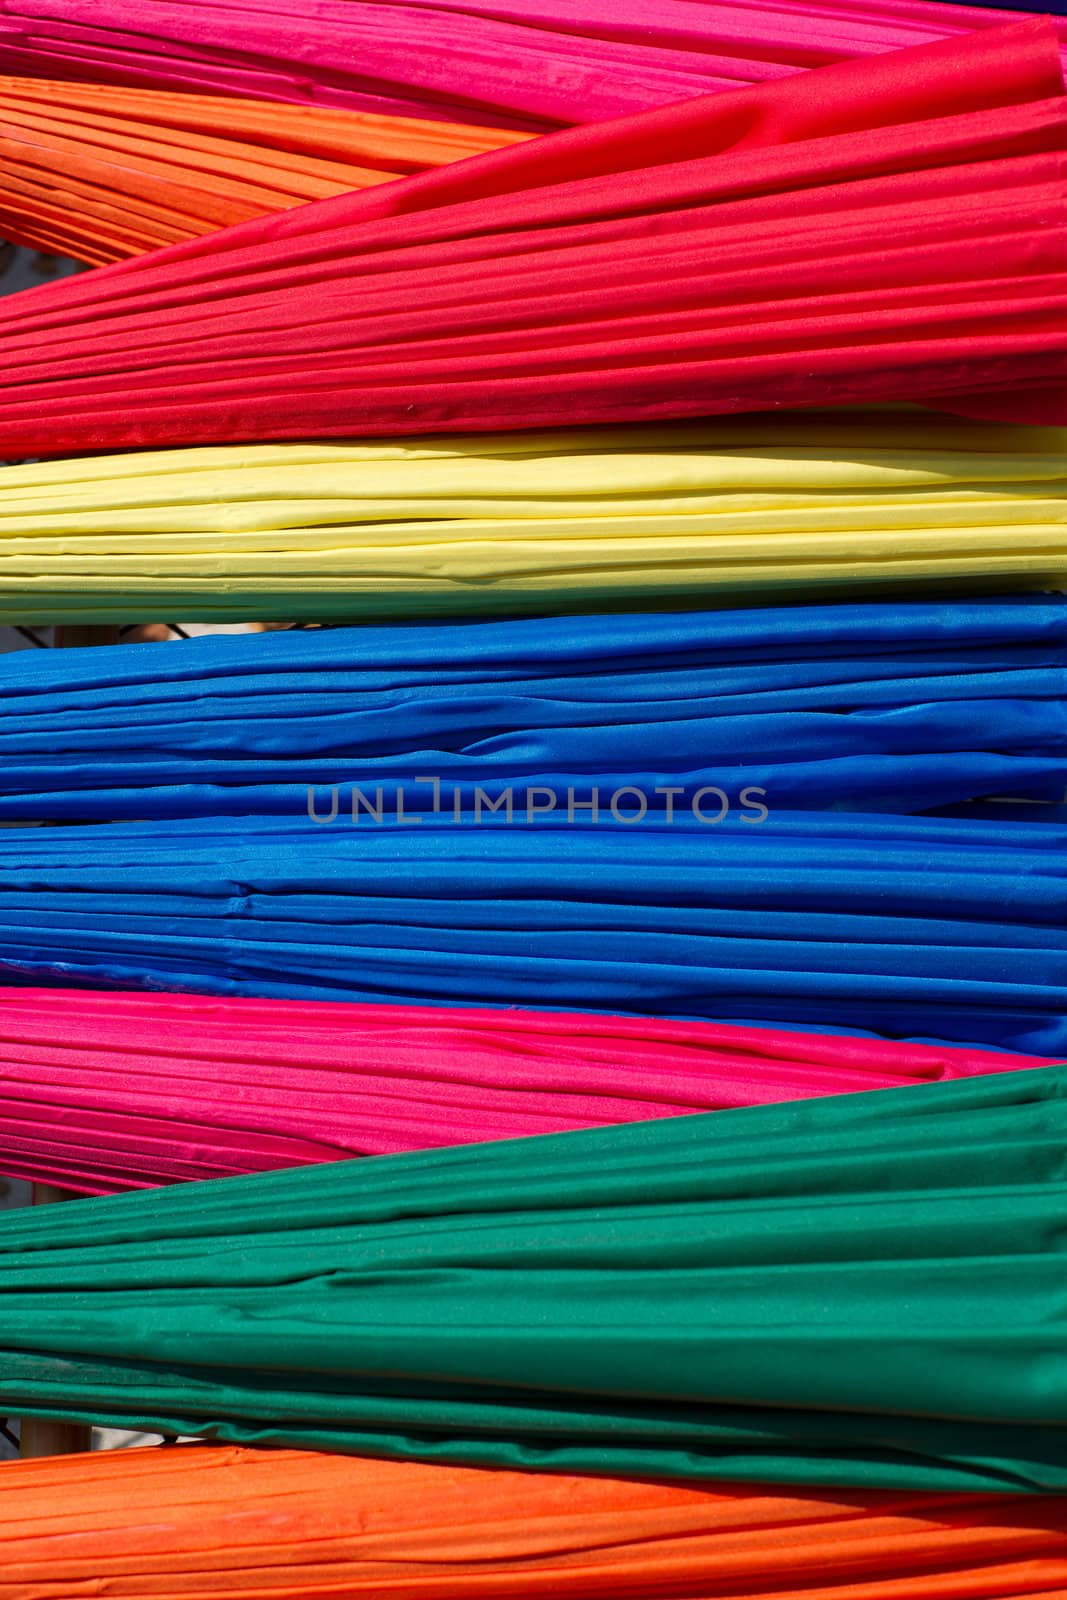 Background from closed multicolored umbrellas made in Bo Sang village, Chiang Mai province, Thailand